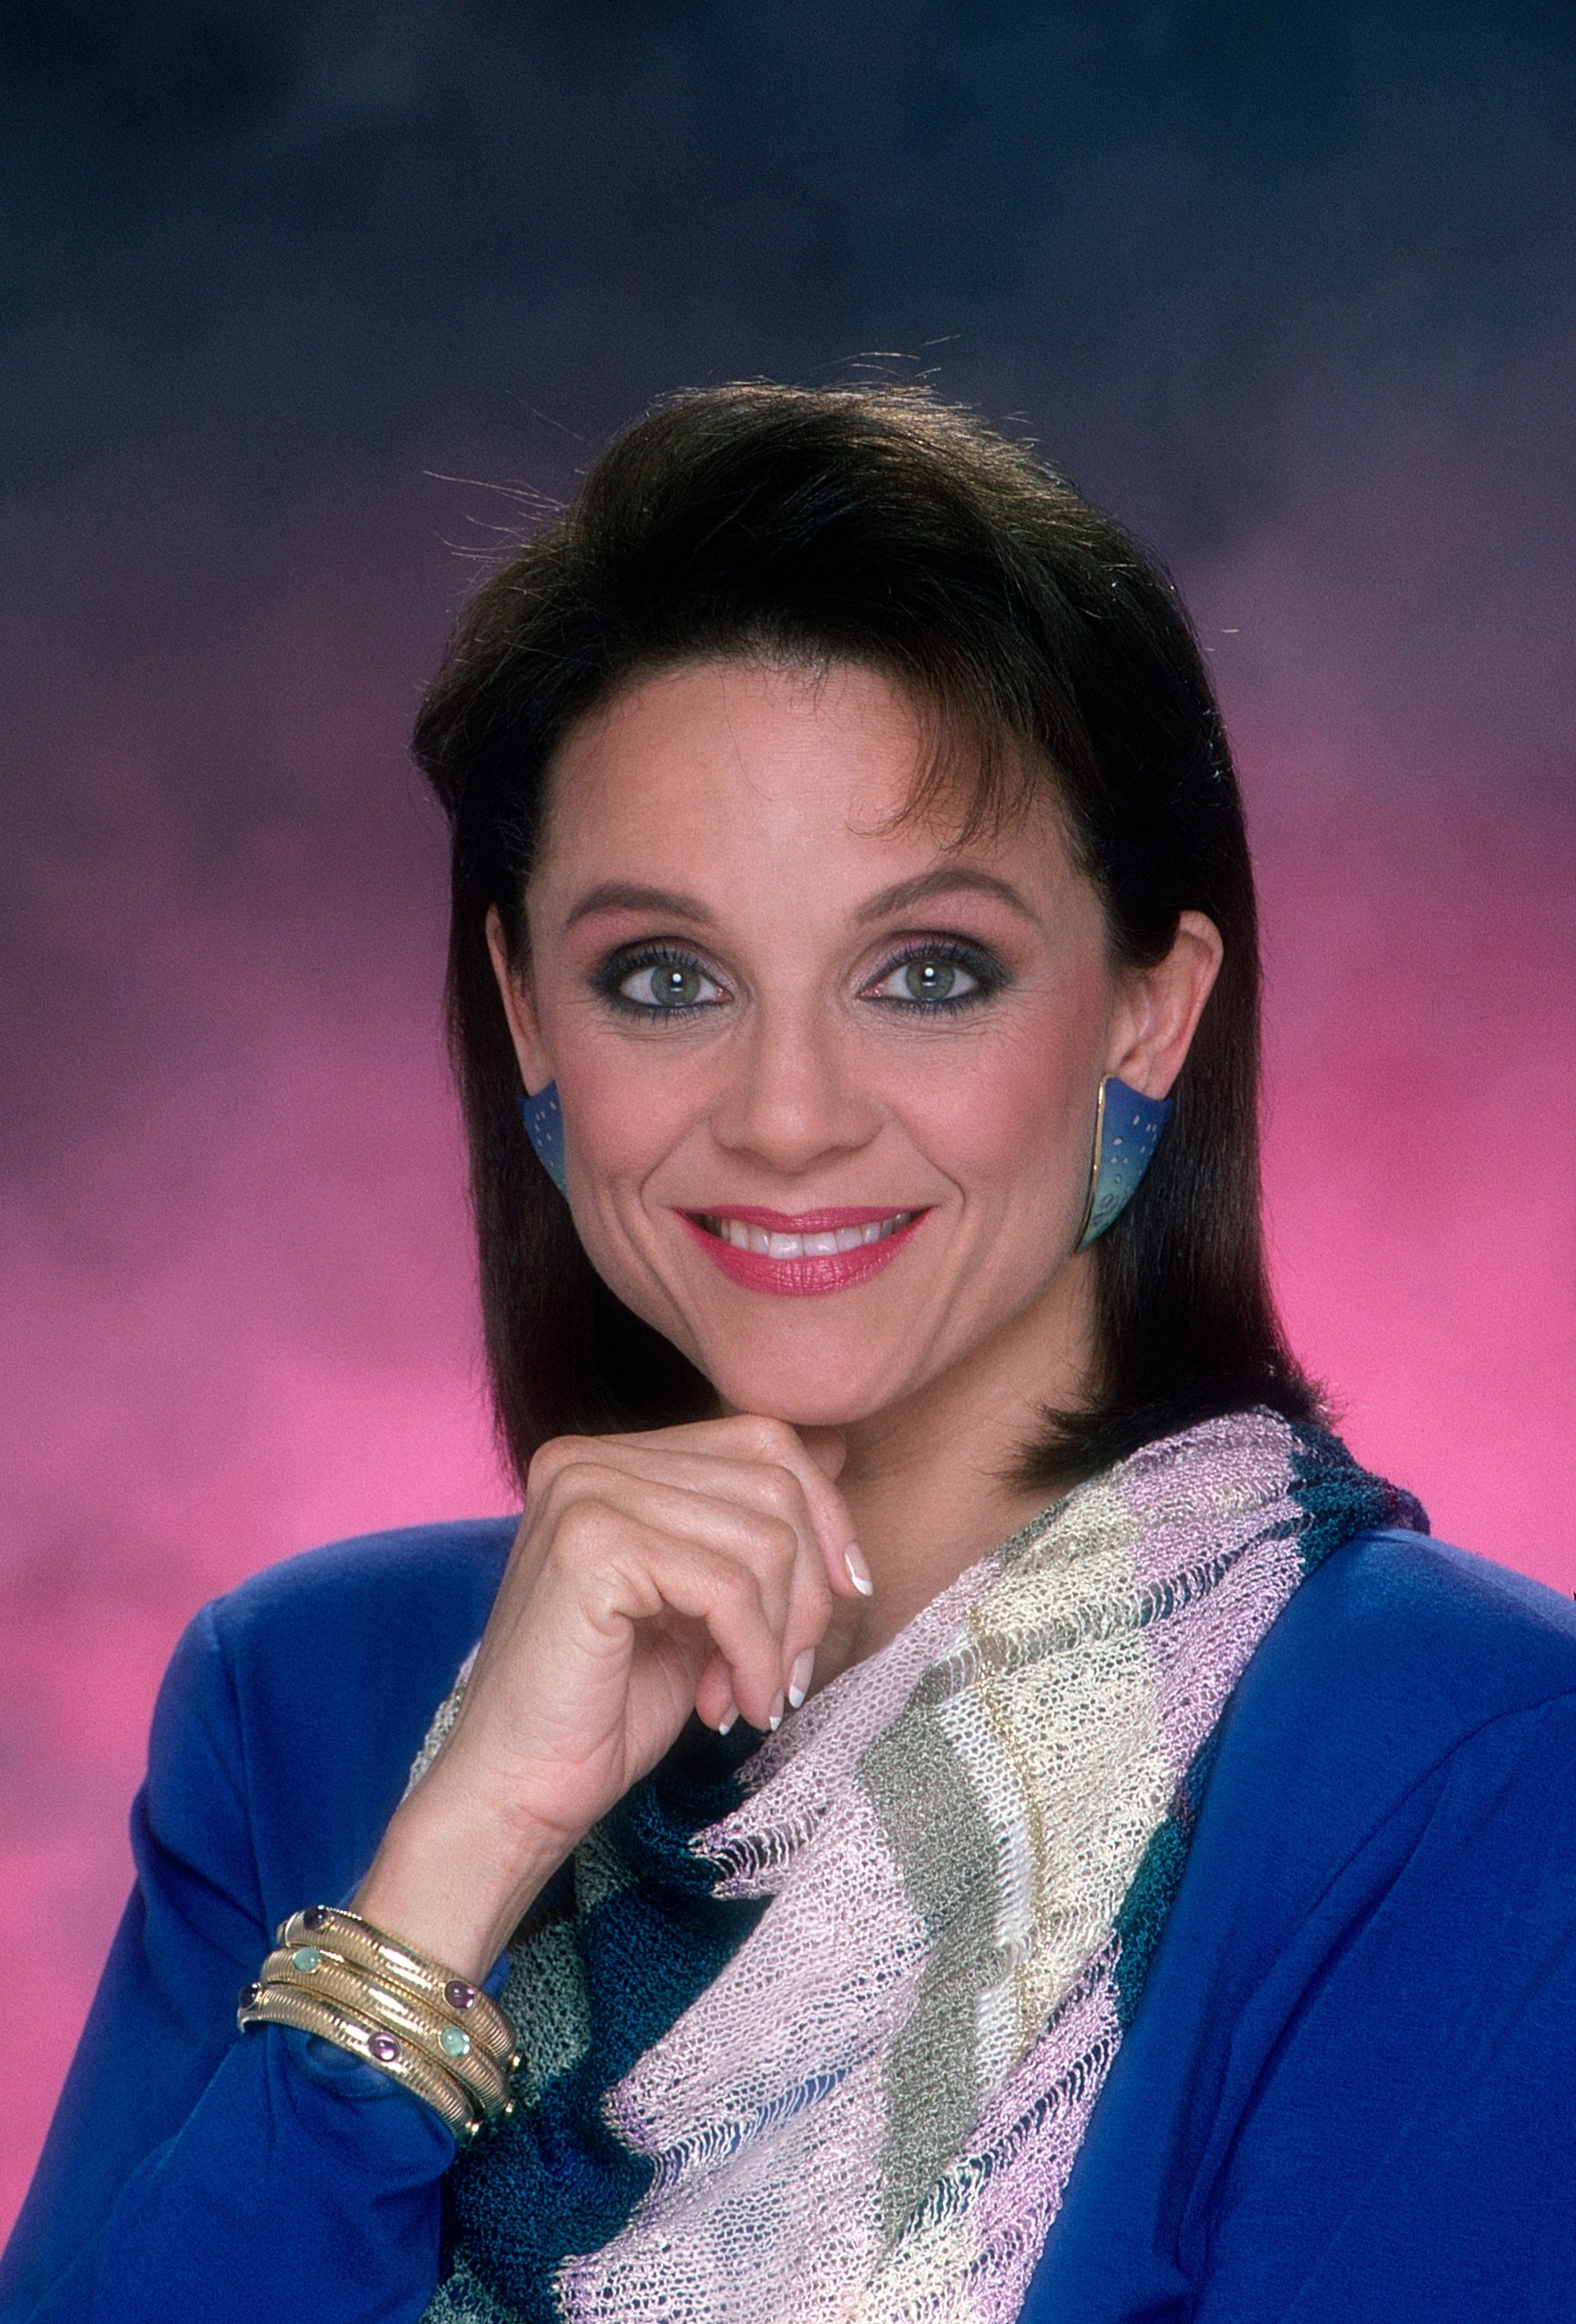 A woman poses with a hand under her chin, smiling, wearing a patterned scarf, bright blue top, and metallic earrings